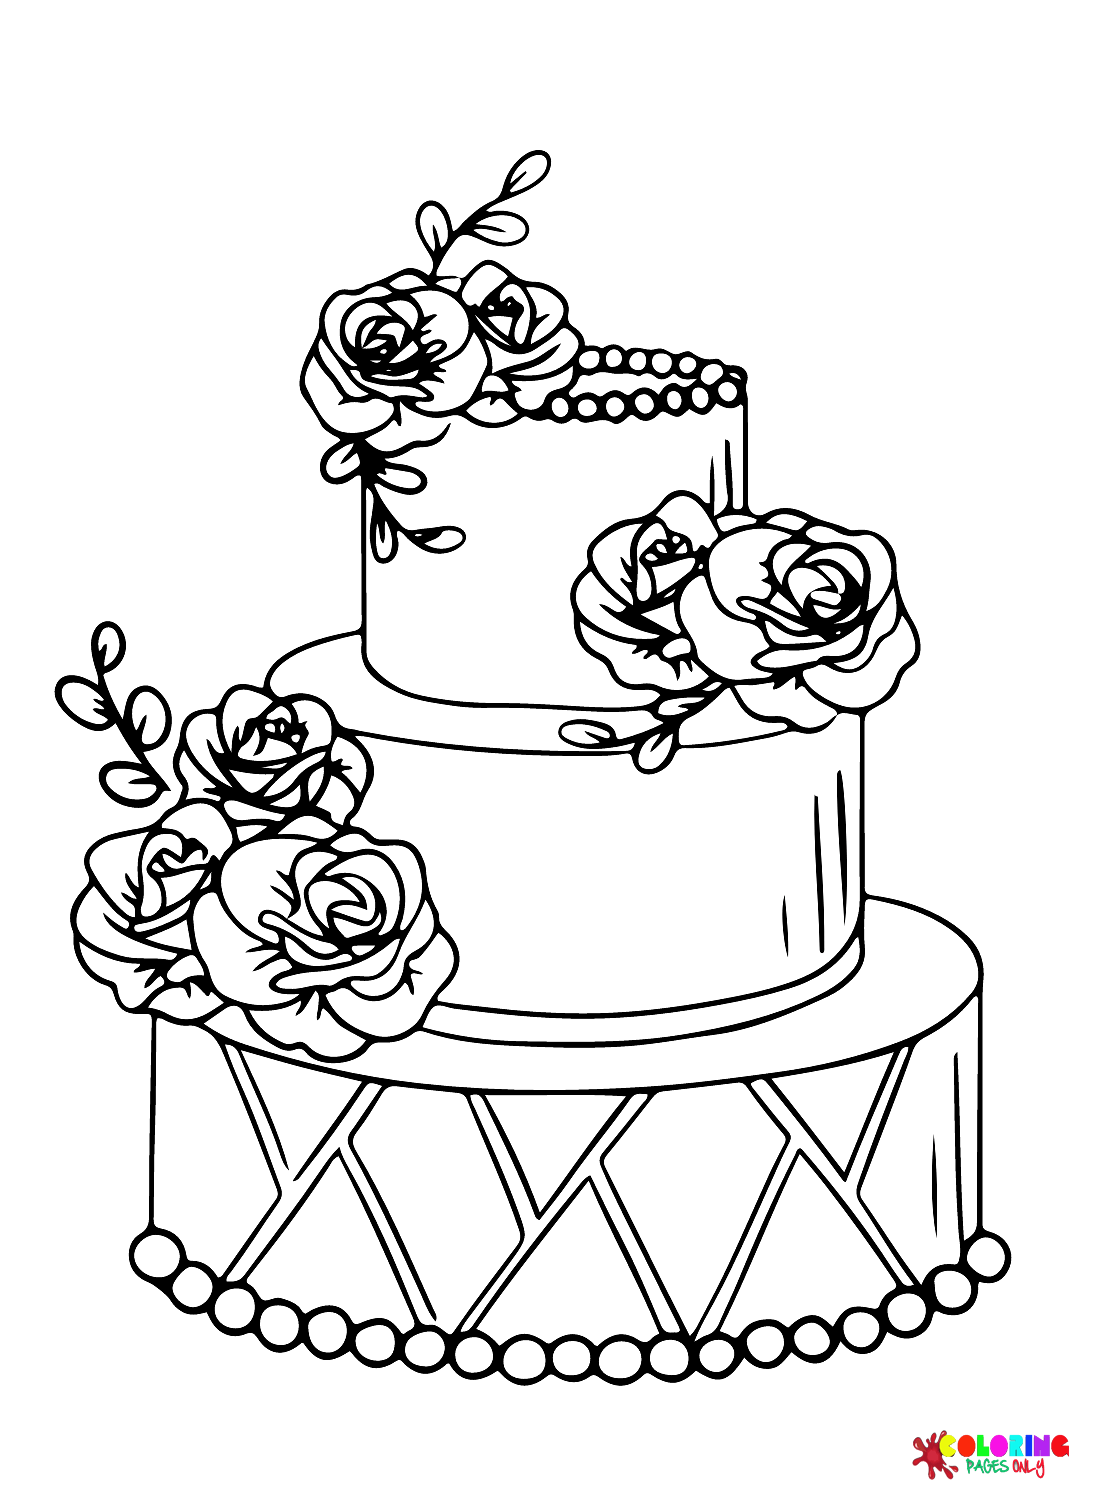 Wedding Cake color Sheets Coloring Page